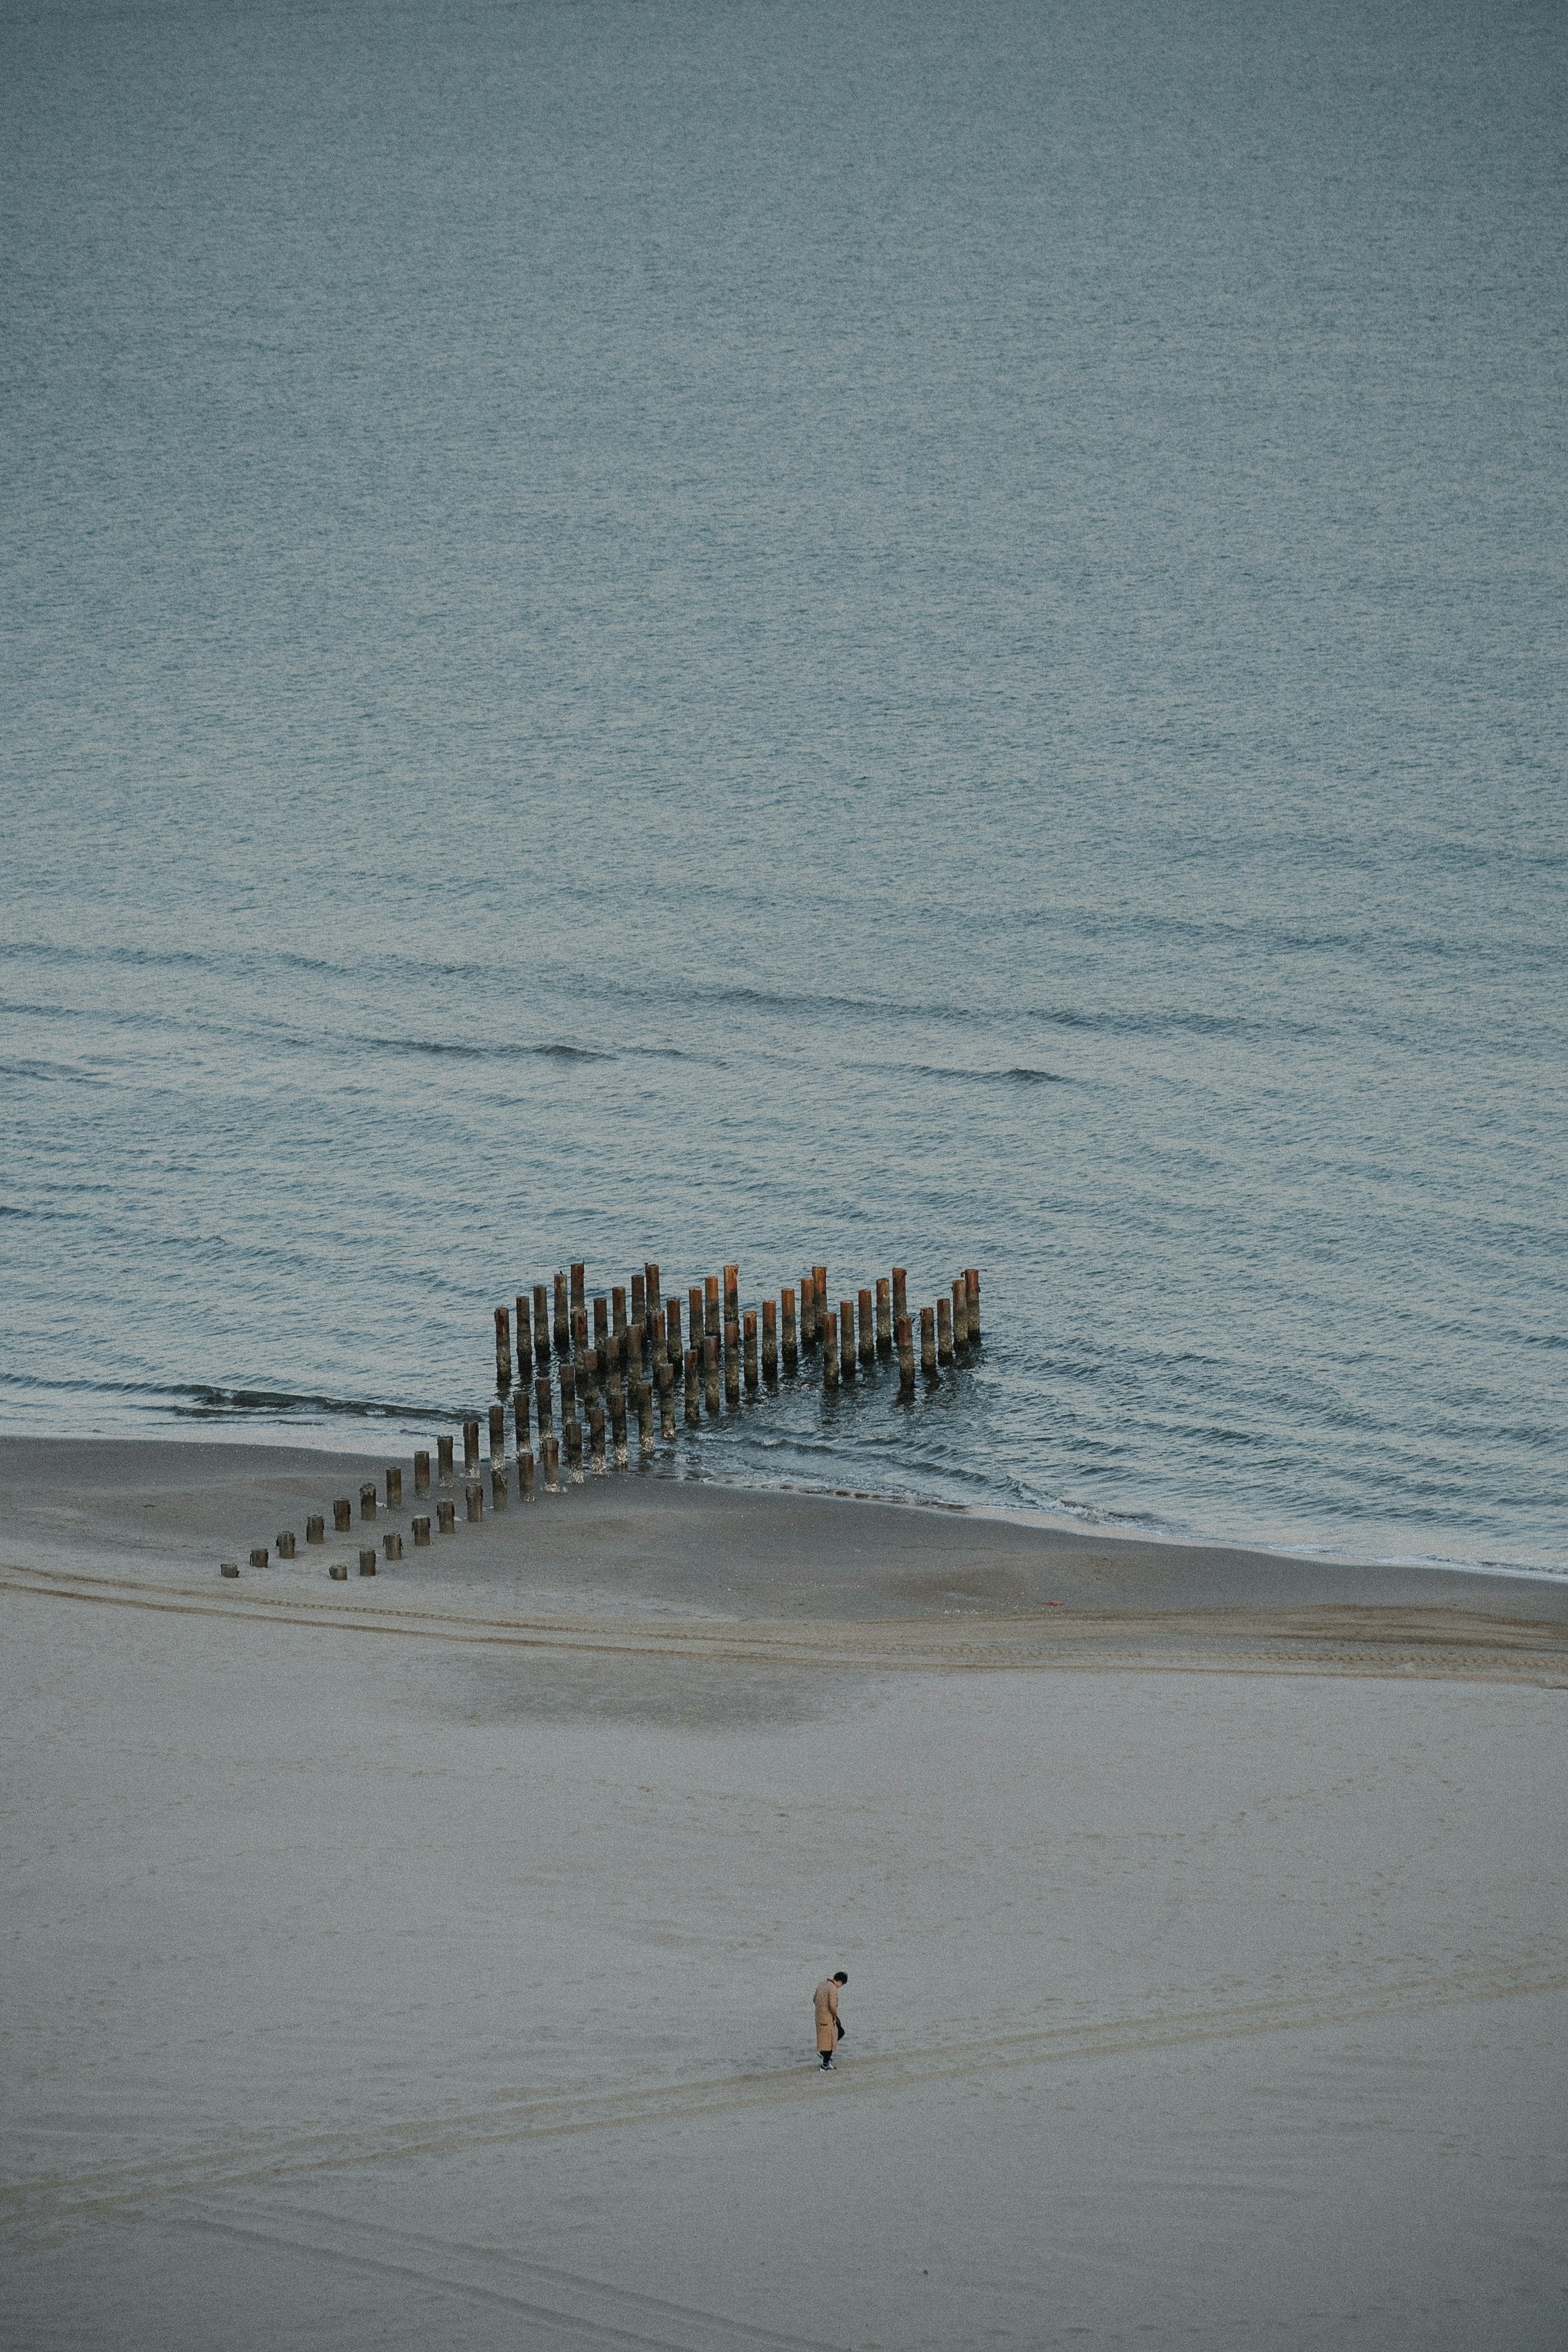 wooden posts in the seashore during daytime